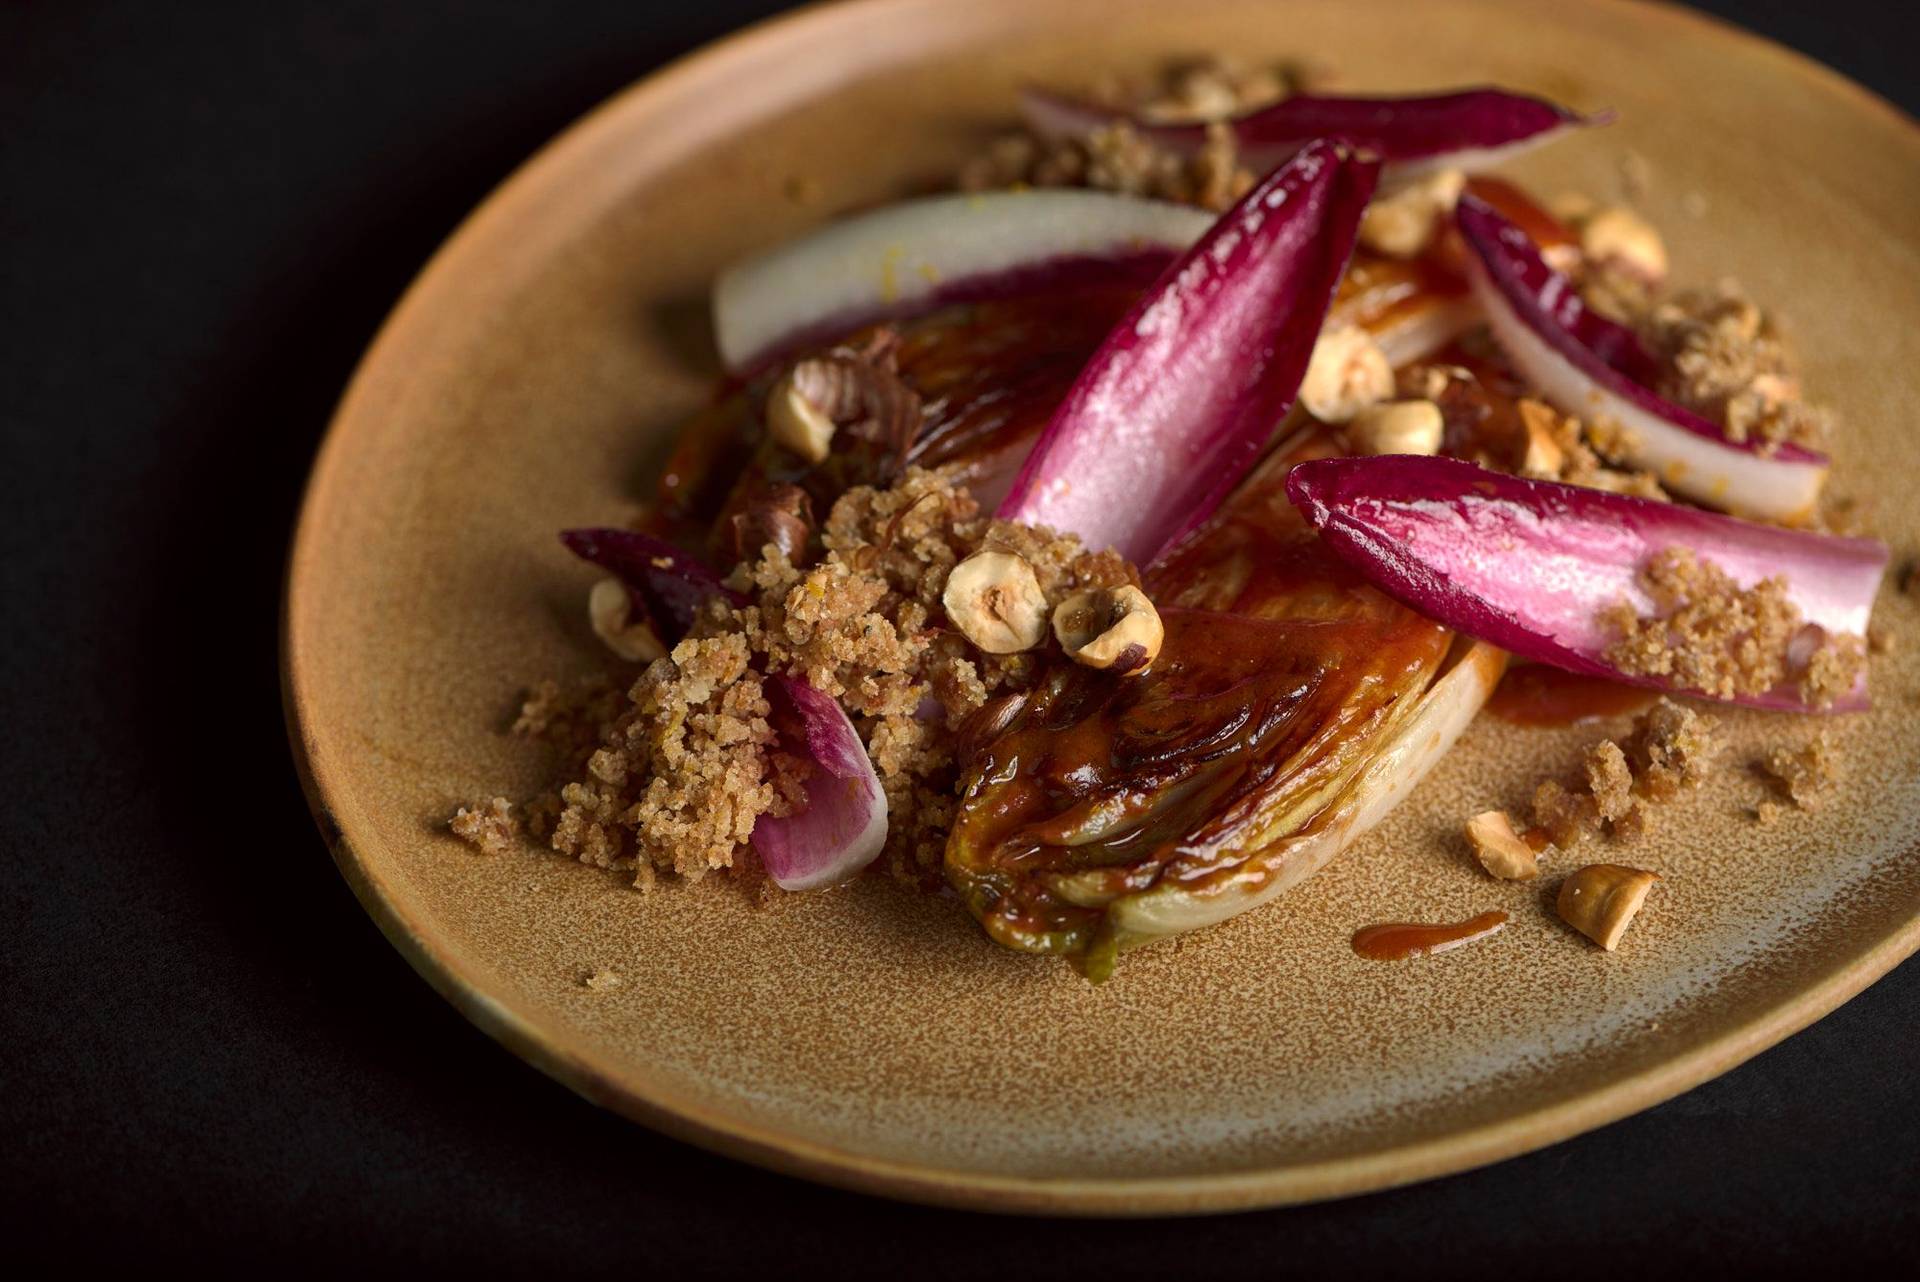 rosehip braised chicory with hazelnuts and crispbread on a brown ceramic plate with black background